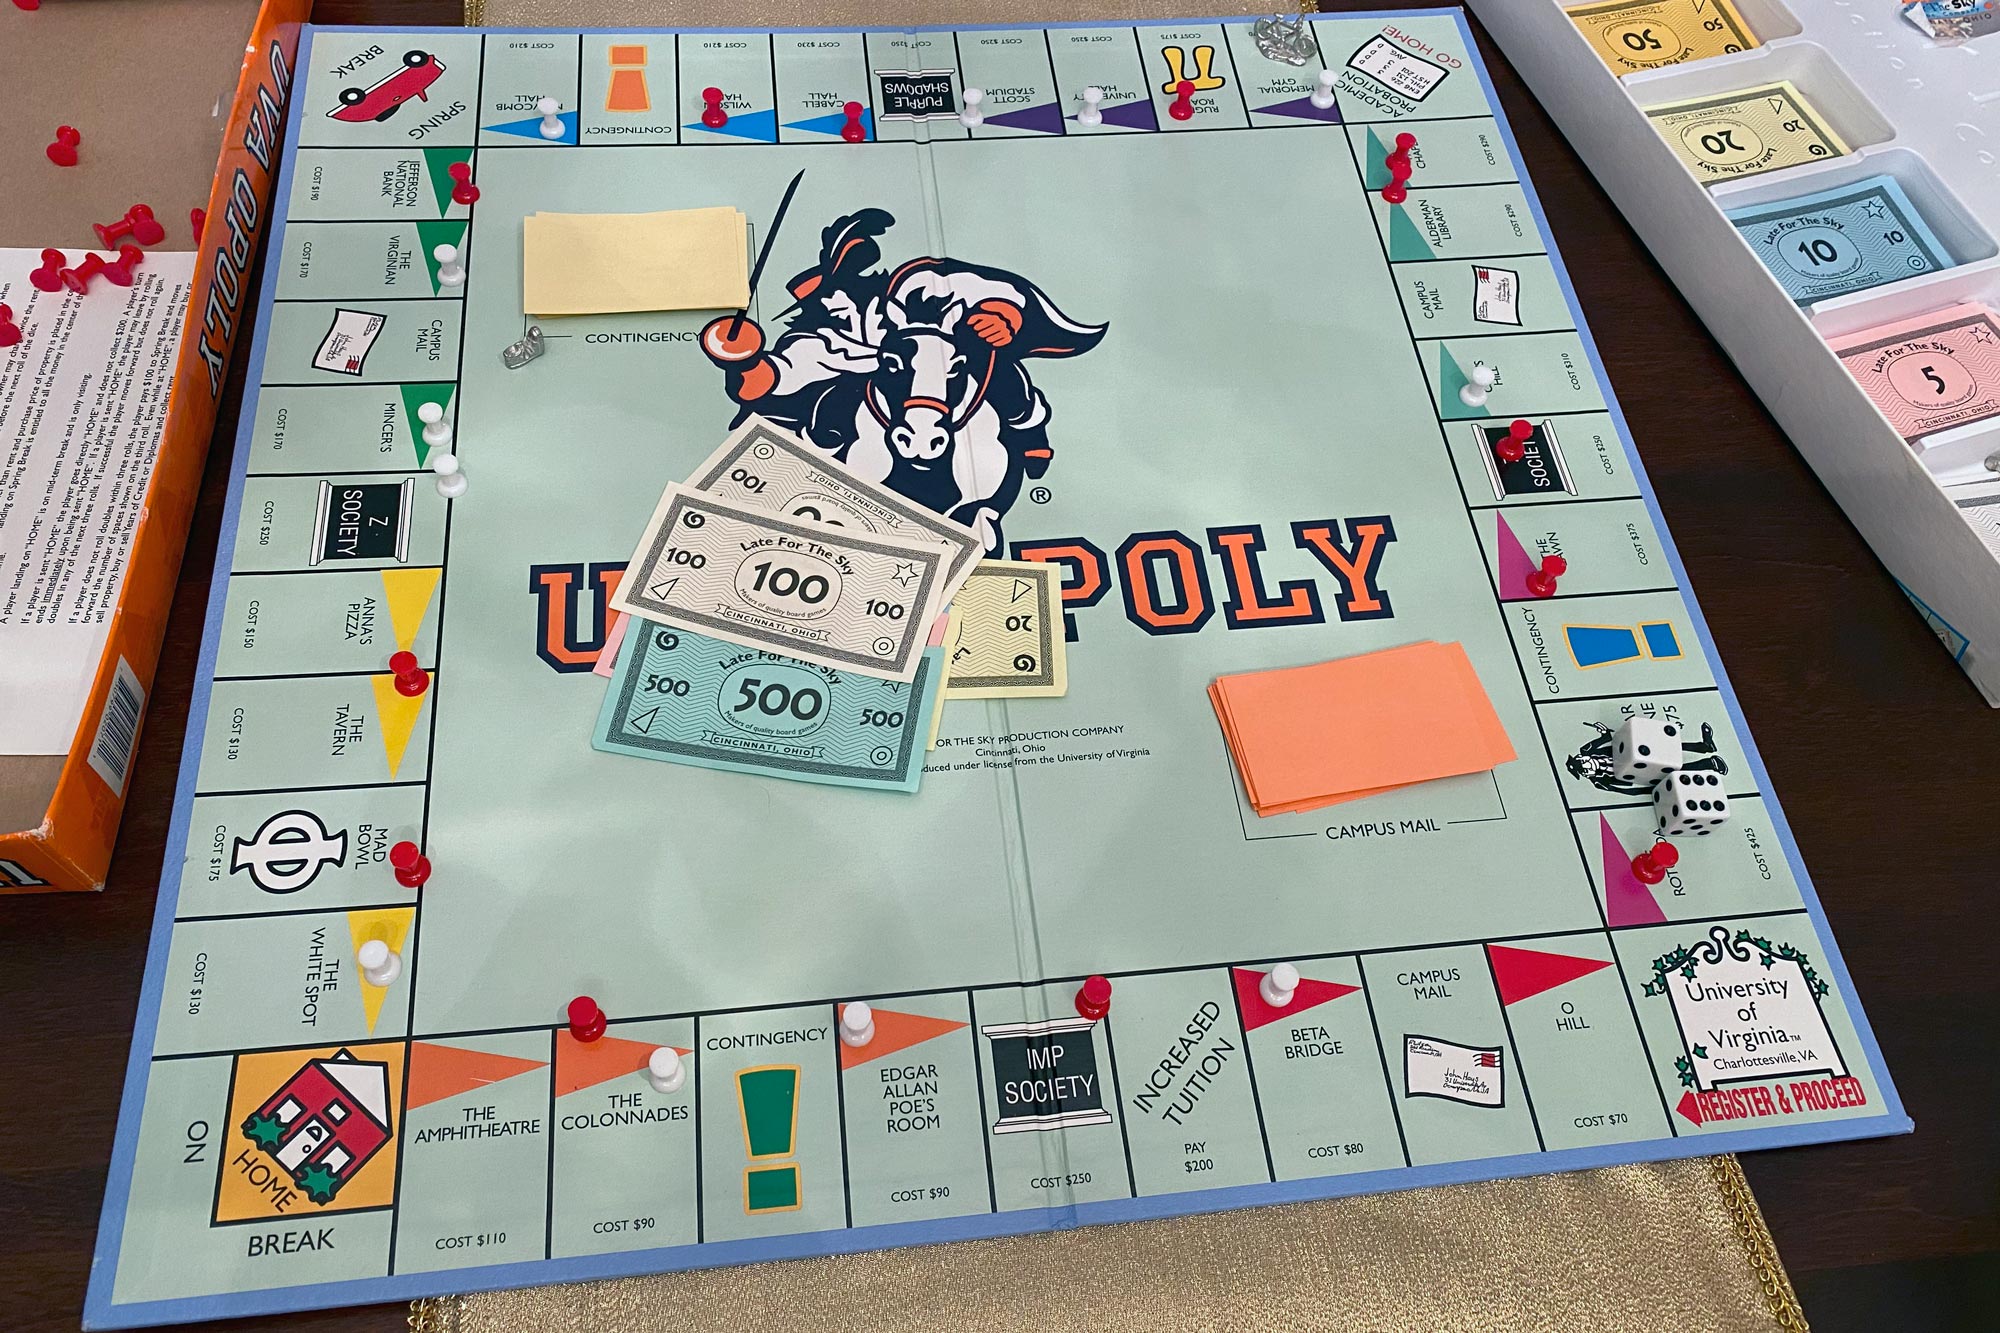 UVA themed Monopoly board with red and white pieces and money on the board